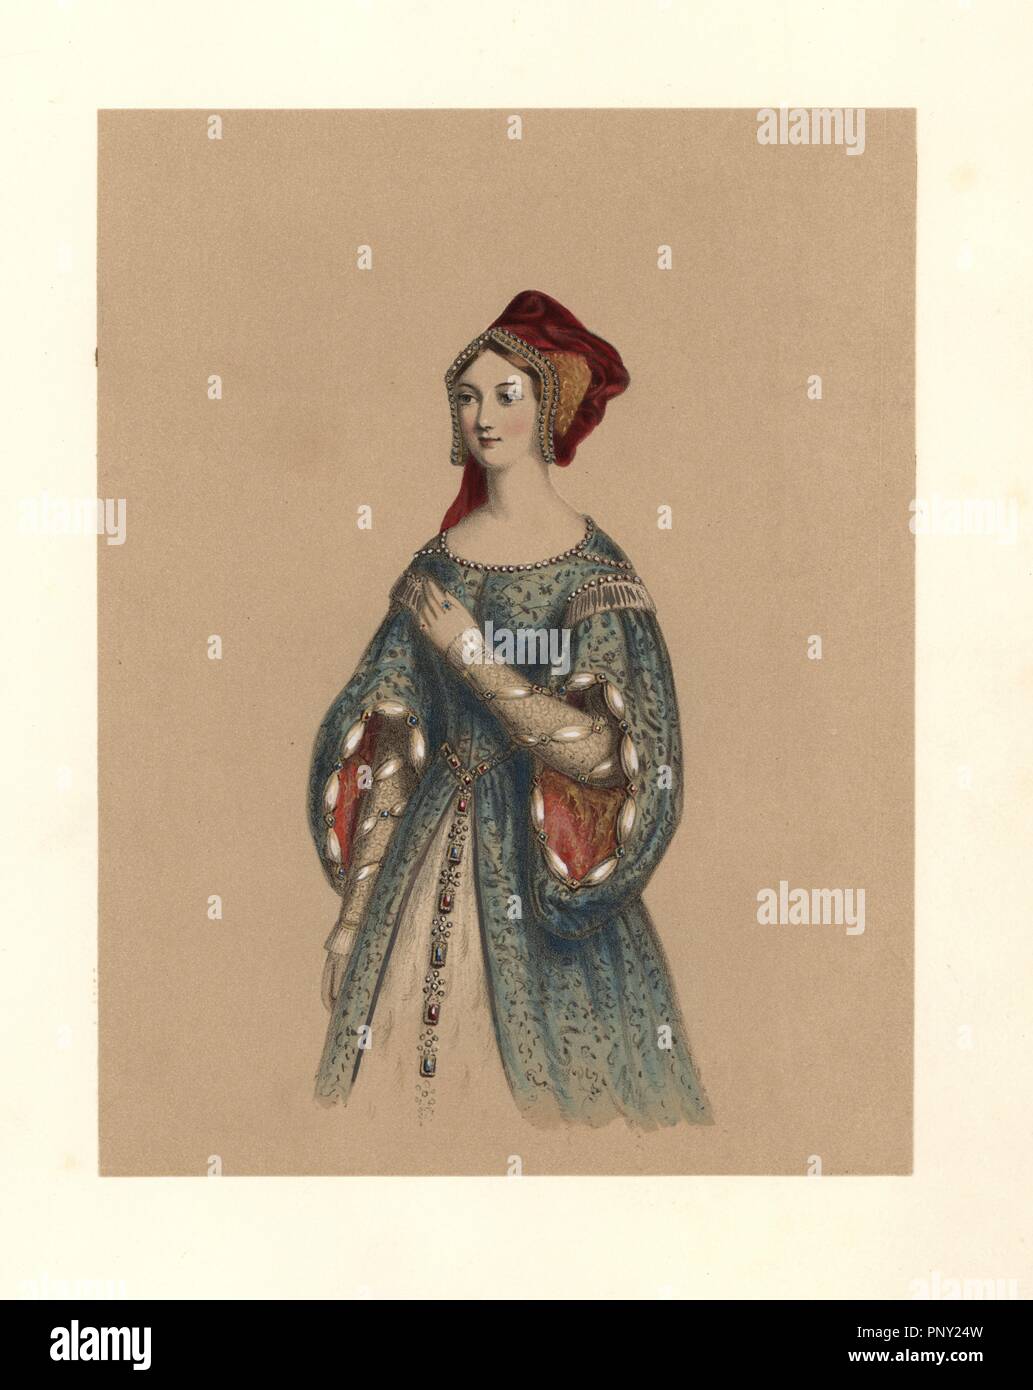 Dress of the reign of King Edward VI, 1547~1553. She wears a velvet hat, round-collared dress decorated with pearls, open puff sleeves, and a jeweled belt. Pedro de Gante, Stow, Hollingshed, and portrait of Elizabeth when princess. Handcoloured lithograph from "Costumes of British Ladies from the Time of William the First to the Reign of Queen Victoria,” London, Dickinson & Son, 1840. 48 mounted plates of women's fashion from 1066 to 1840 based on effigies, manuscripts, portraits, prints and literary descriptions. Stock Photo